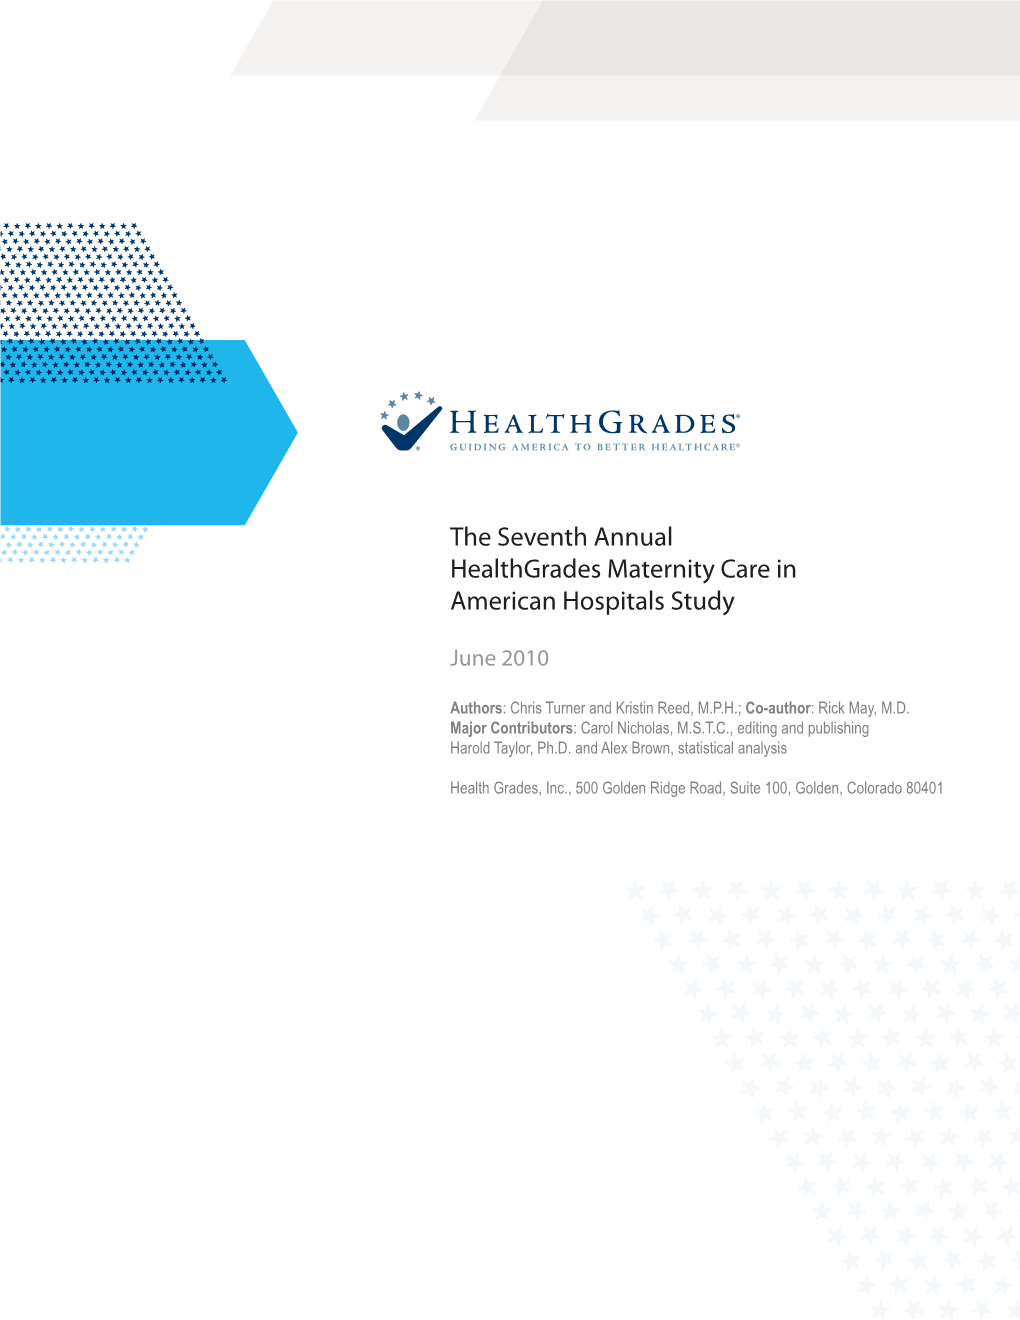 The Seventh Annual Healthgrades Maternity Care in American Hospitals Study